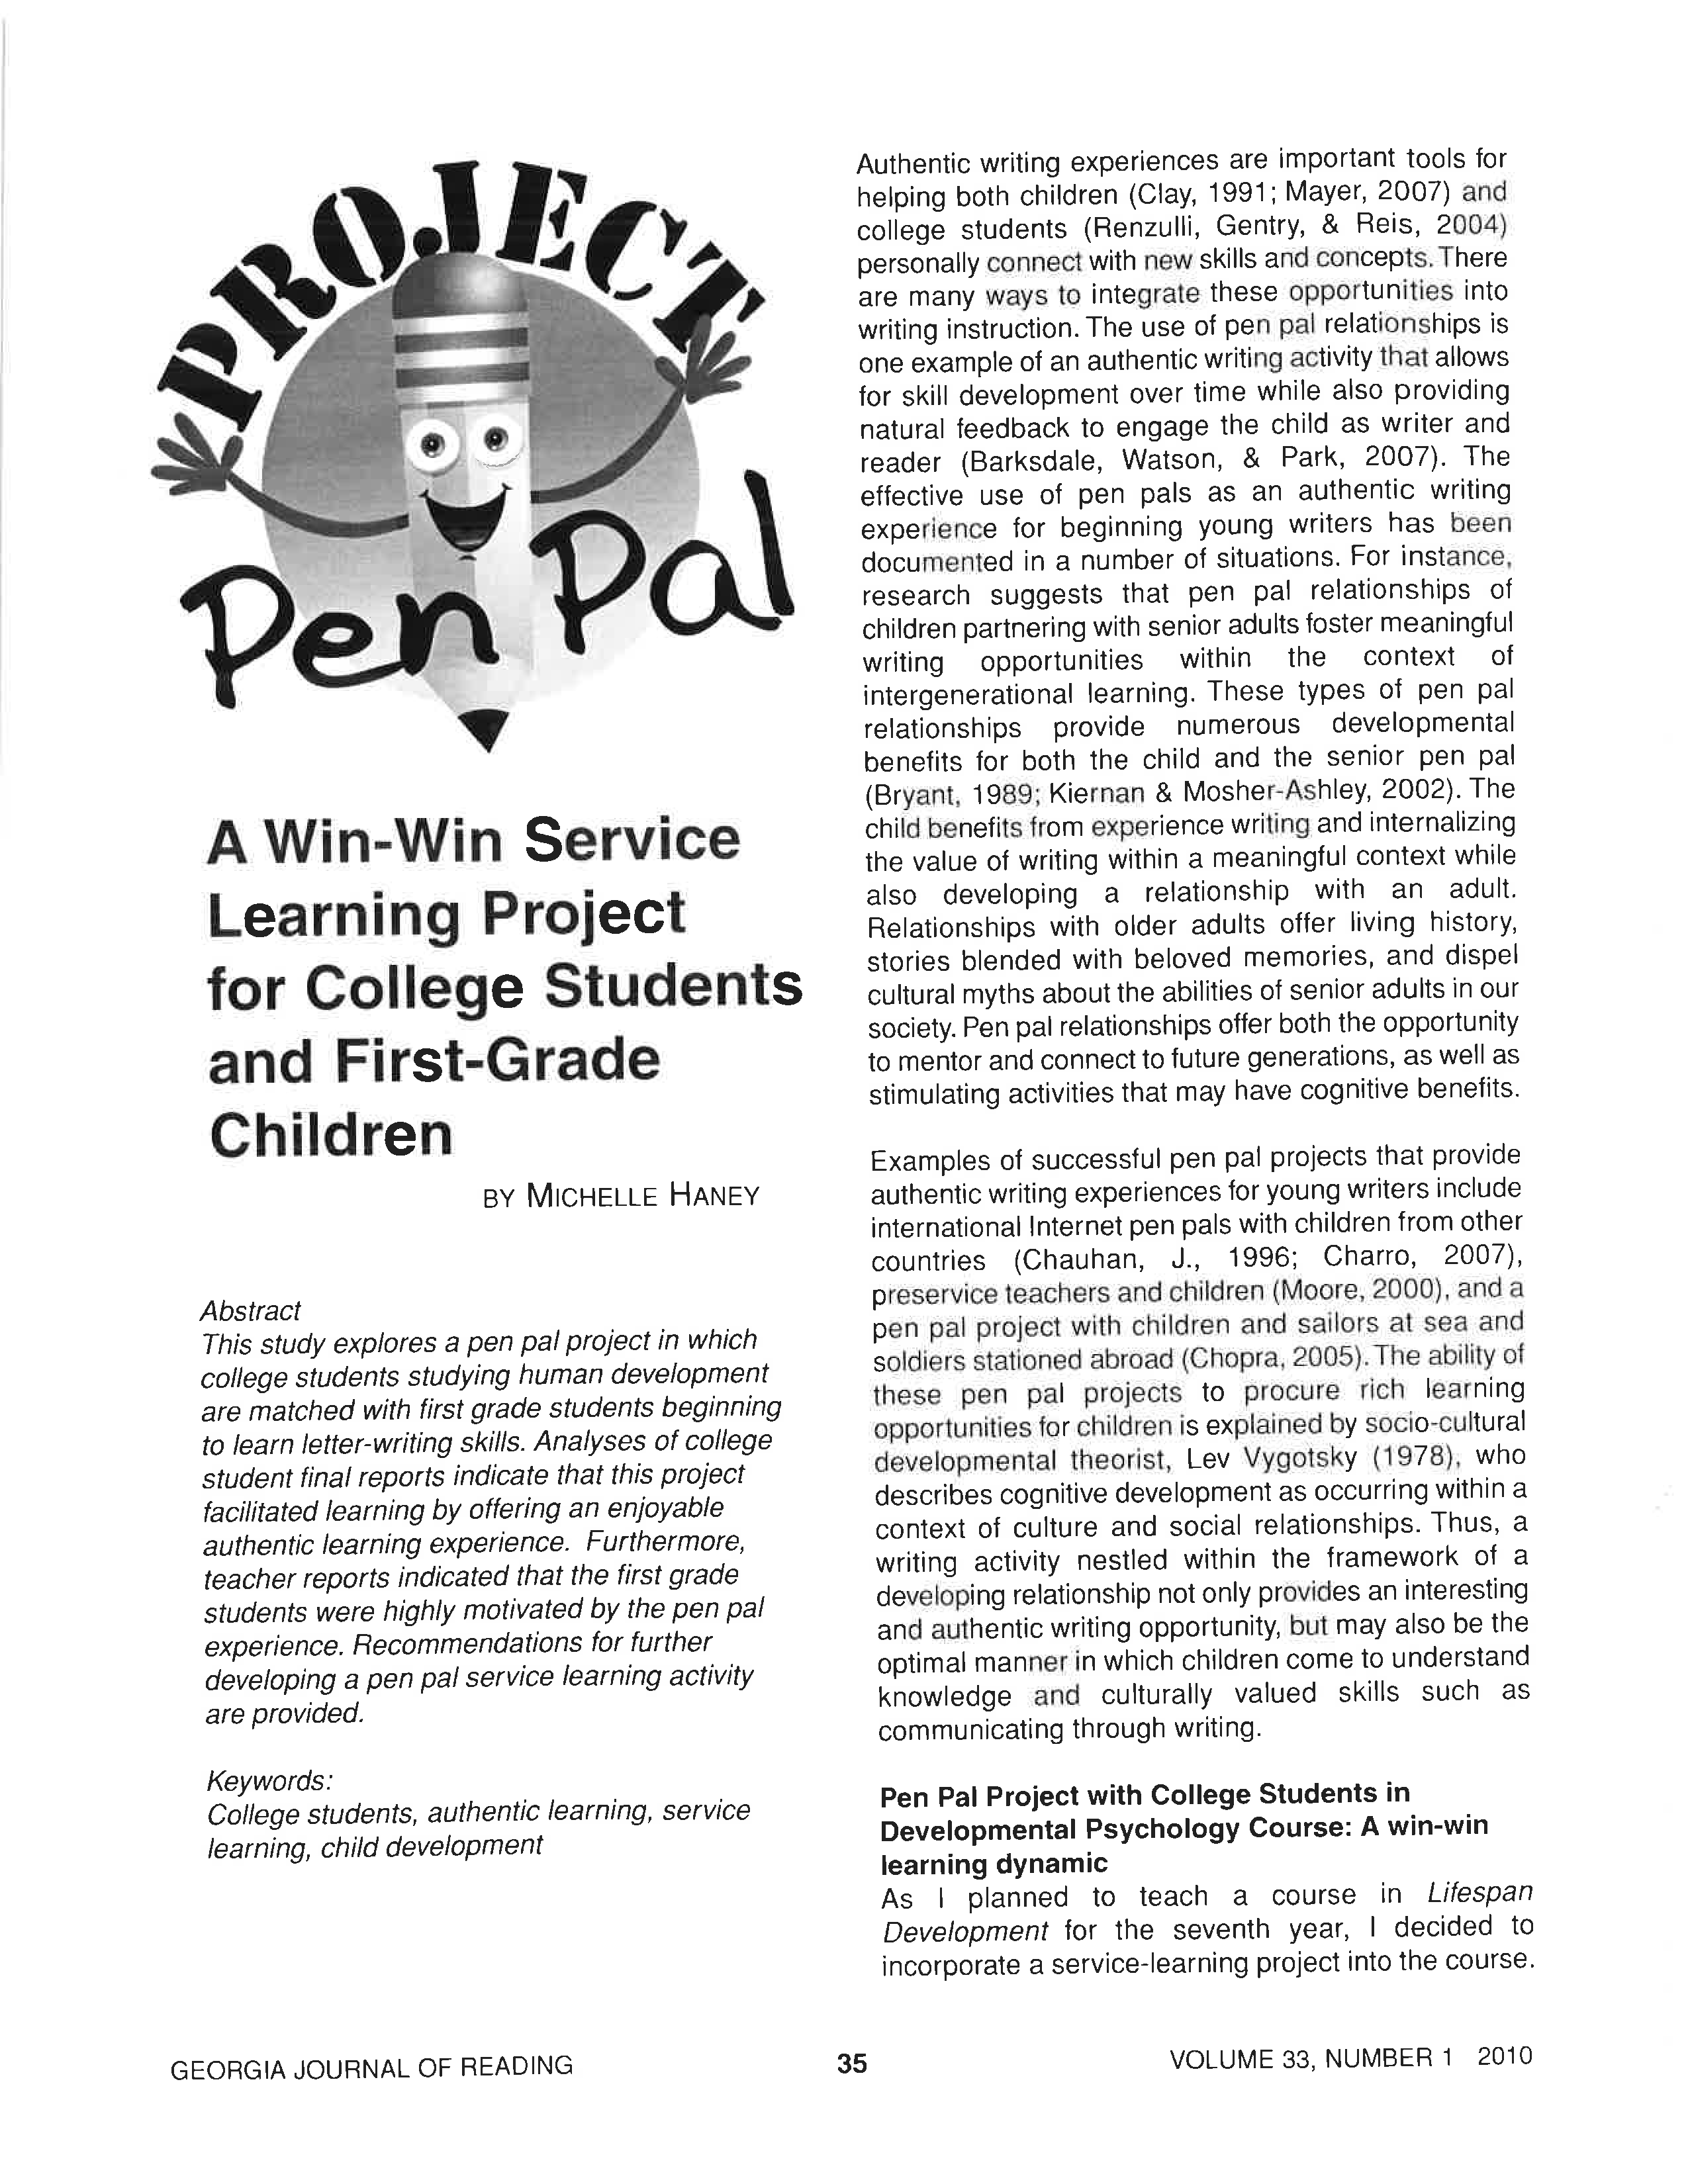 Project Pen Pal A Win-Win Service Learning Project for College Students and First-Grade Children